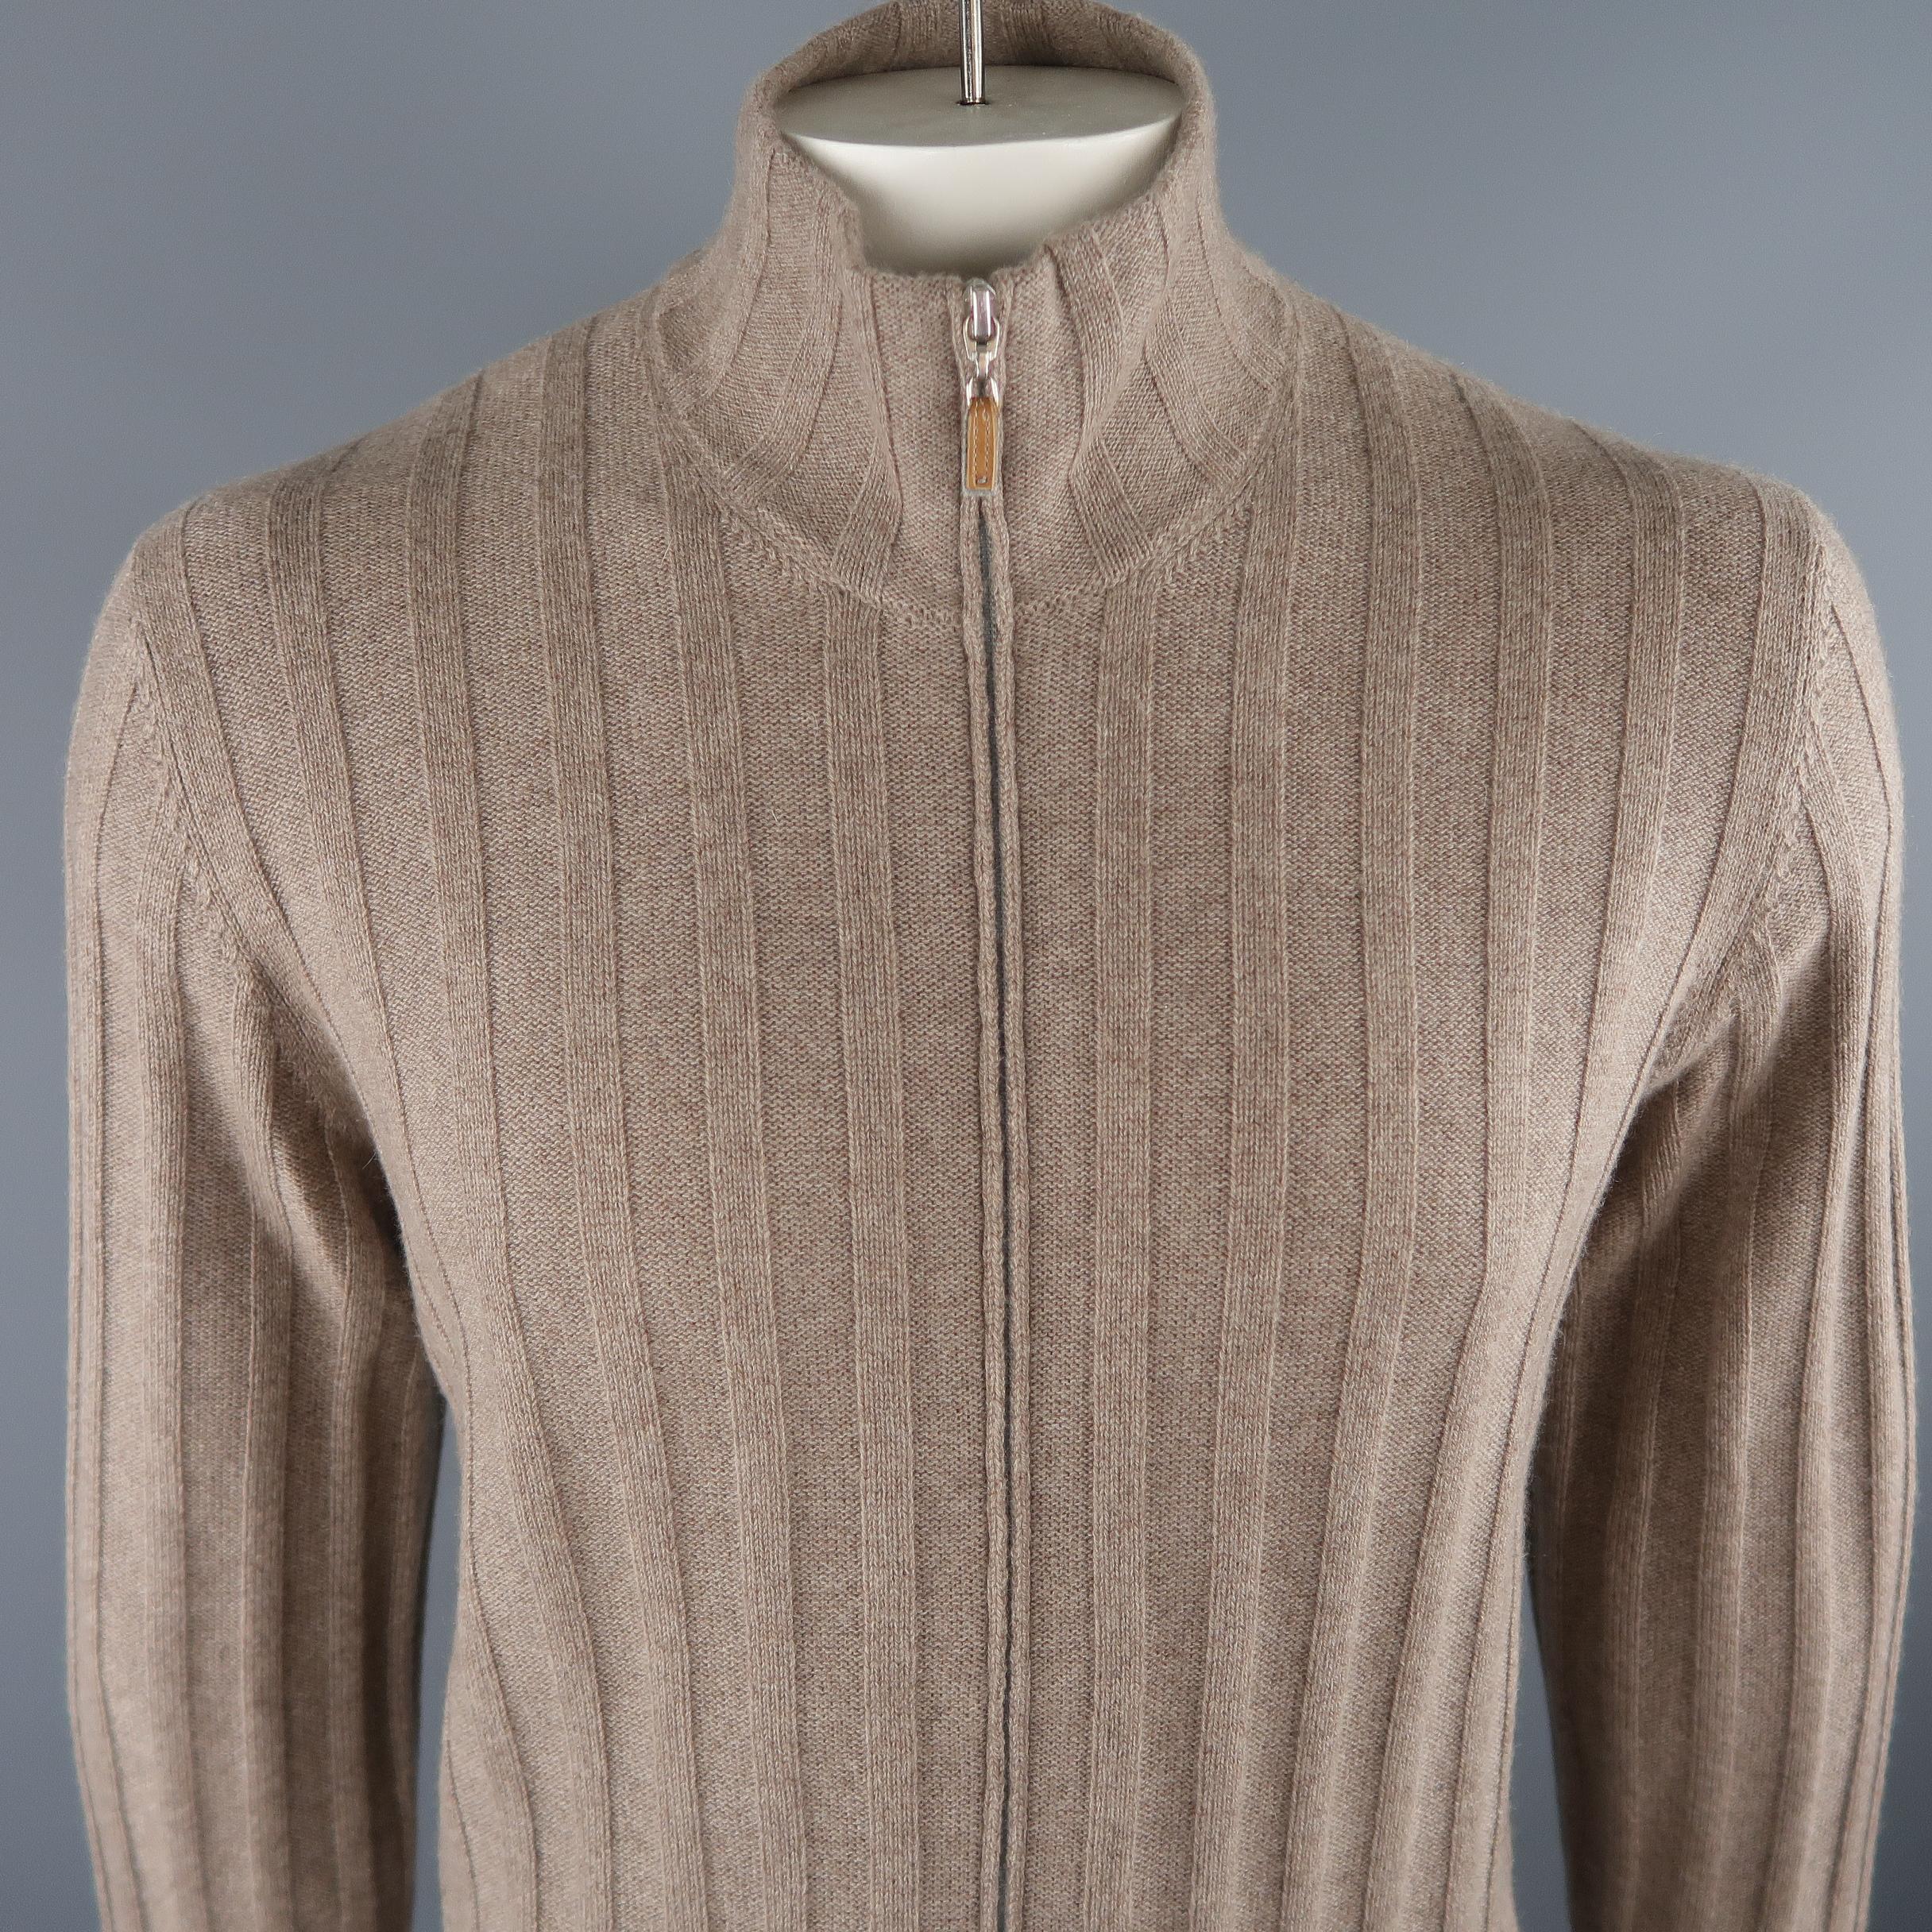 BRUNELLO CUCINELLI cardigan comes in oatmeal tone, knitted 100% cashmere material, with zip up front, ribbed cuffs and waistband. Made in Italy.
 
New with Tags.
Marked: 52 IT
 
Measurements:
 
Shoulder: 18.5 in.
Chest: 46 in.
Sleeve: 27.5 